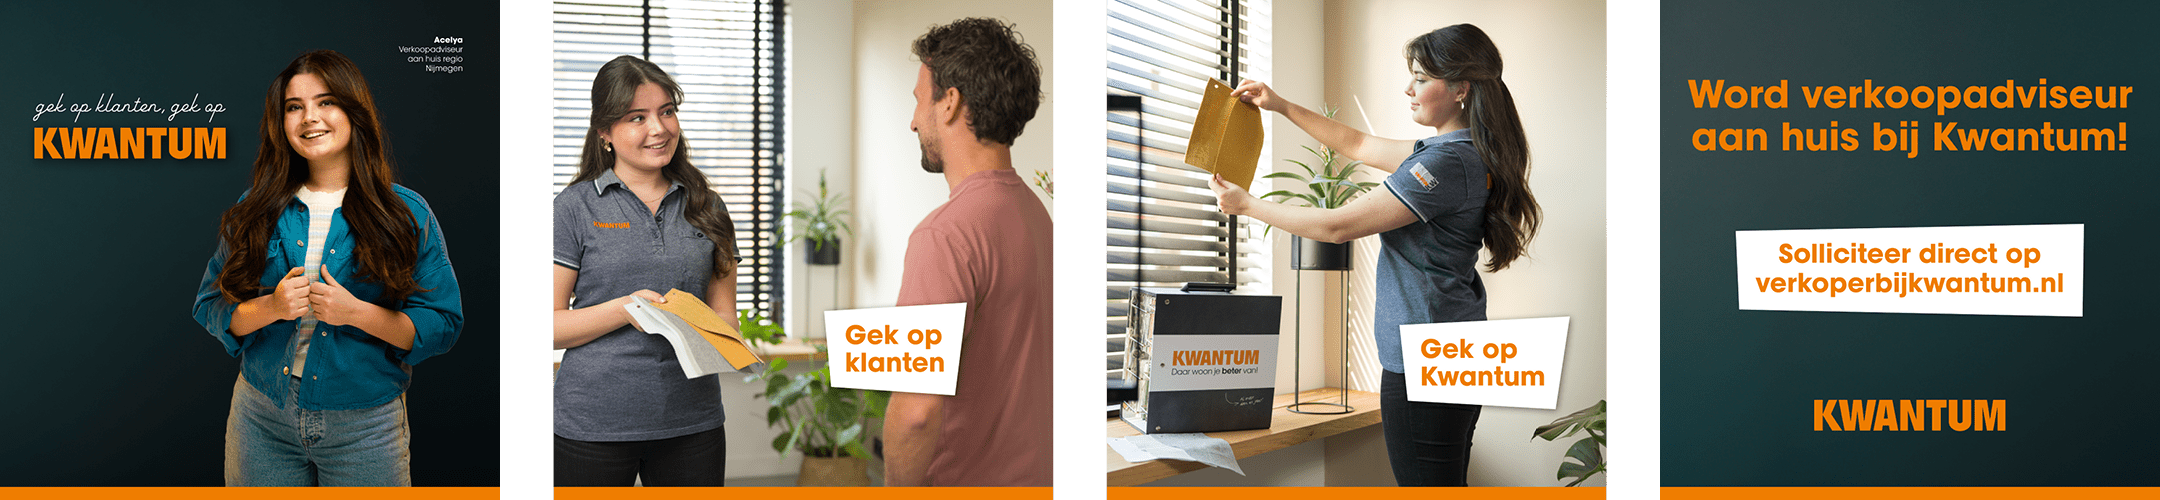 Wervingscampagne Kwantum -